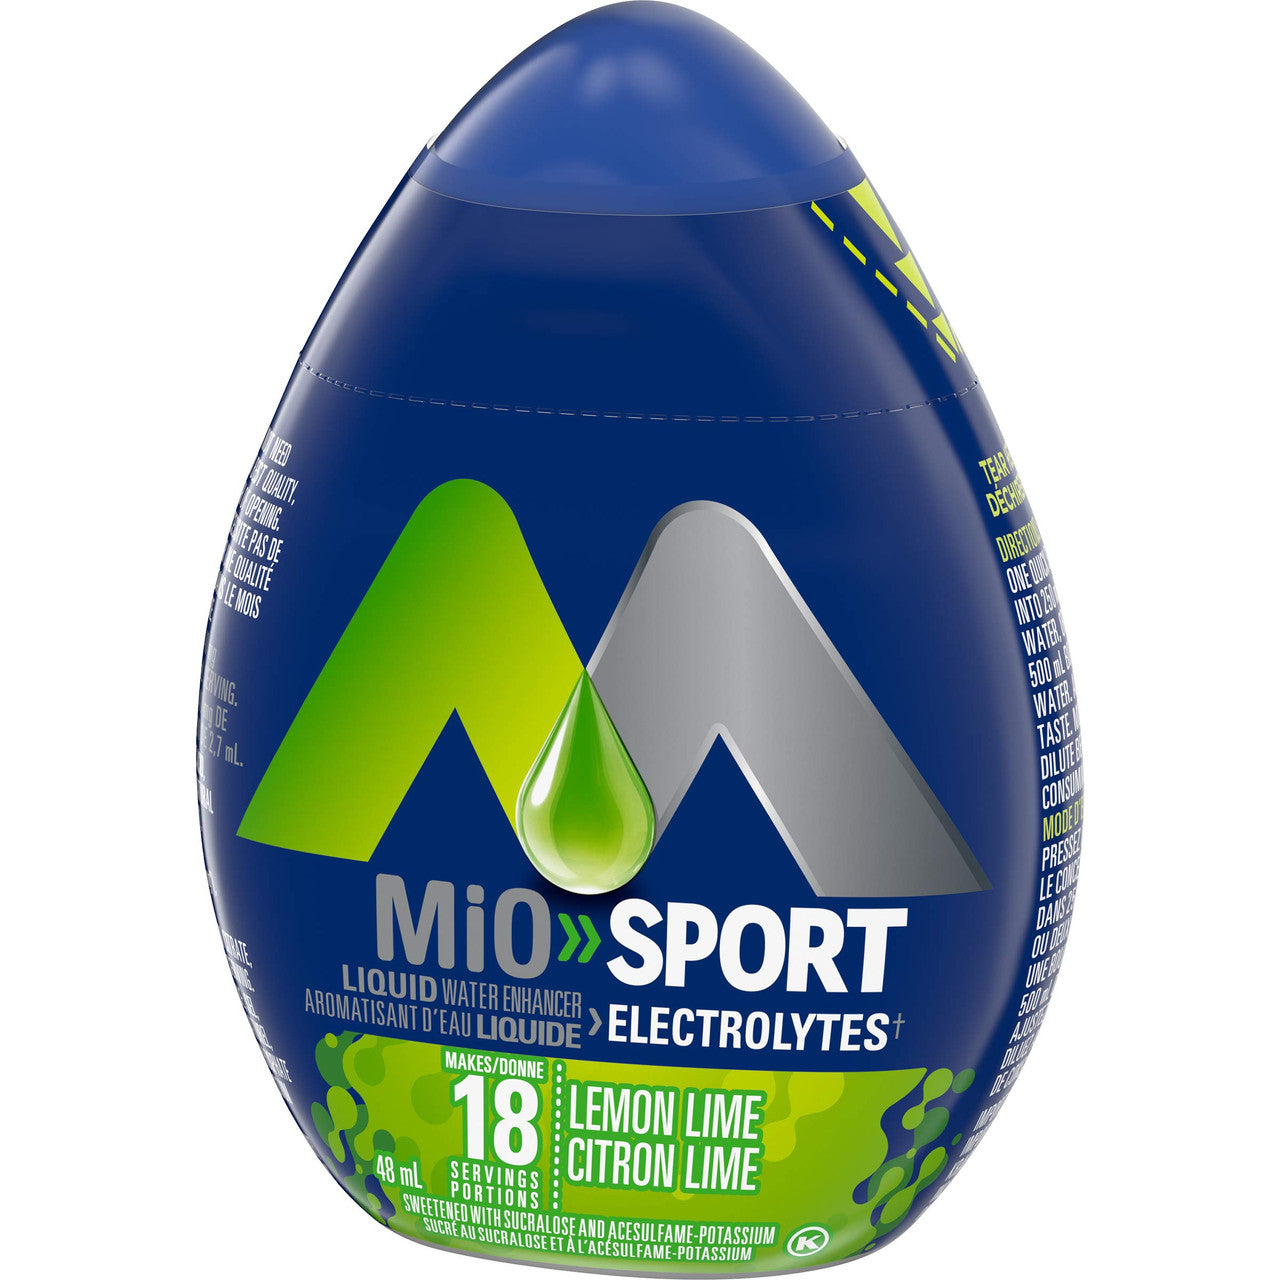 MiO Sport Lemon-Lime Electrolyte Liquid Water Enhancer, 48mL/1.6 fl. oz., (12 pack) {Imported from Canada}